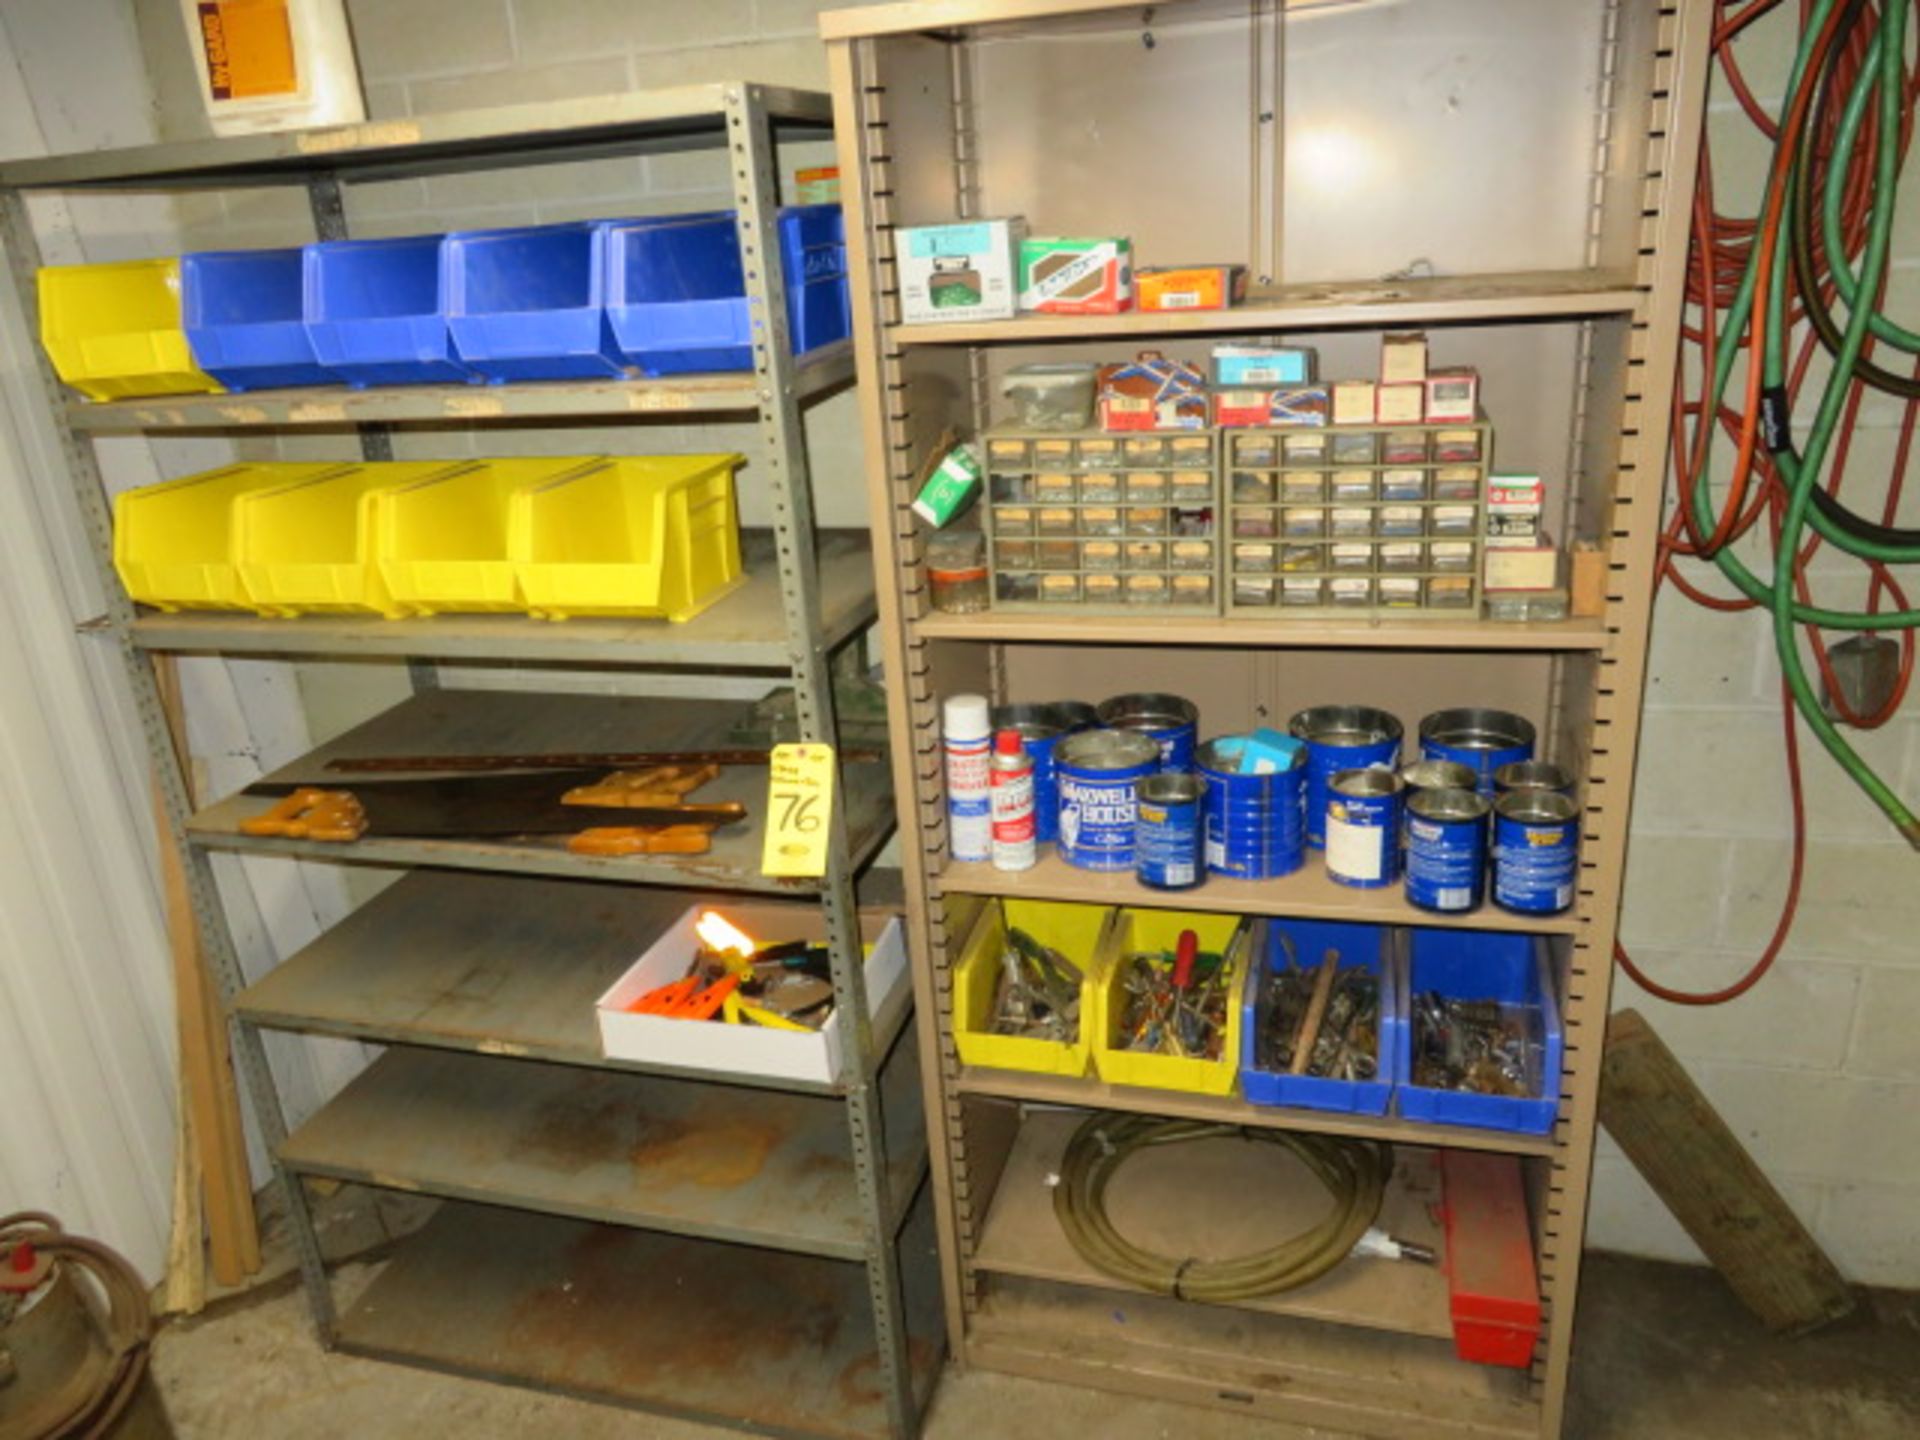 (2) SECTIONS SHELVES, HARDWARE, TOOLS, BOX CUTTERS, SAWS, AKRO BINS, ETC